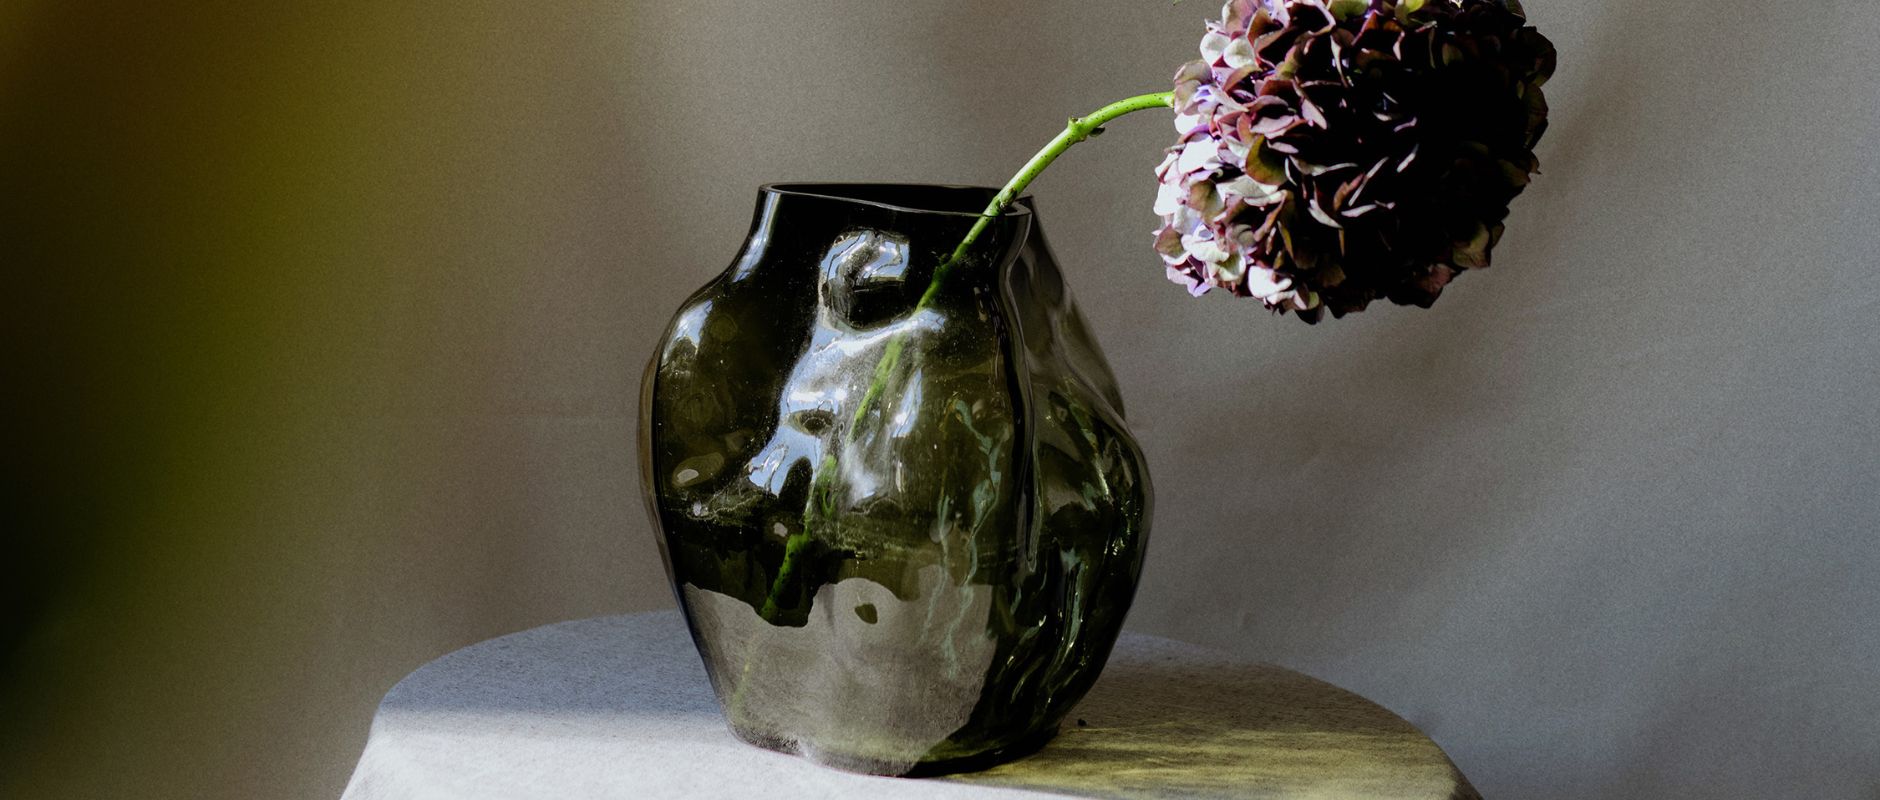 Banner for a blog post about how to achieve a timeless and elegant look in your home. The image features NEW WORK's glass Blaehr vases, which has a unique organic shape and is speckled with indents. The vase is sitting on a table with a white table cloth and has a dusty purple flower in it.